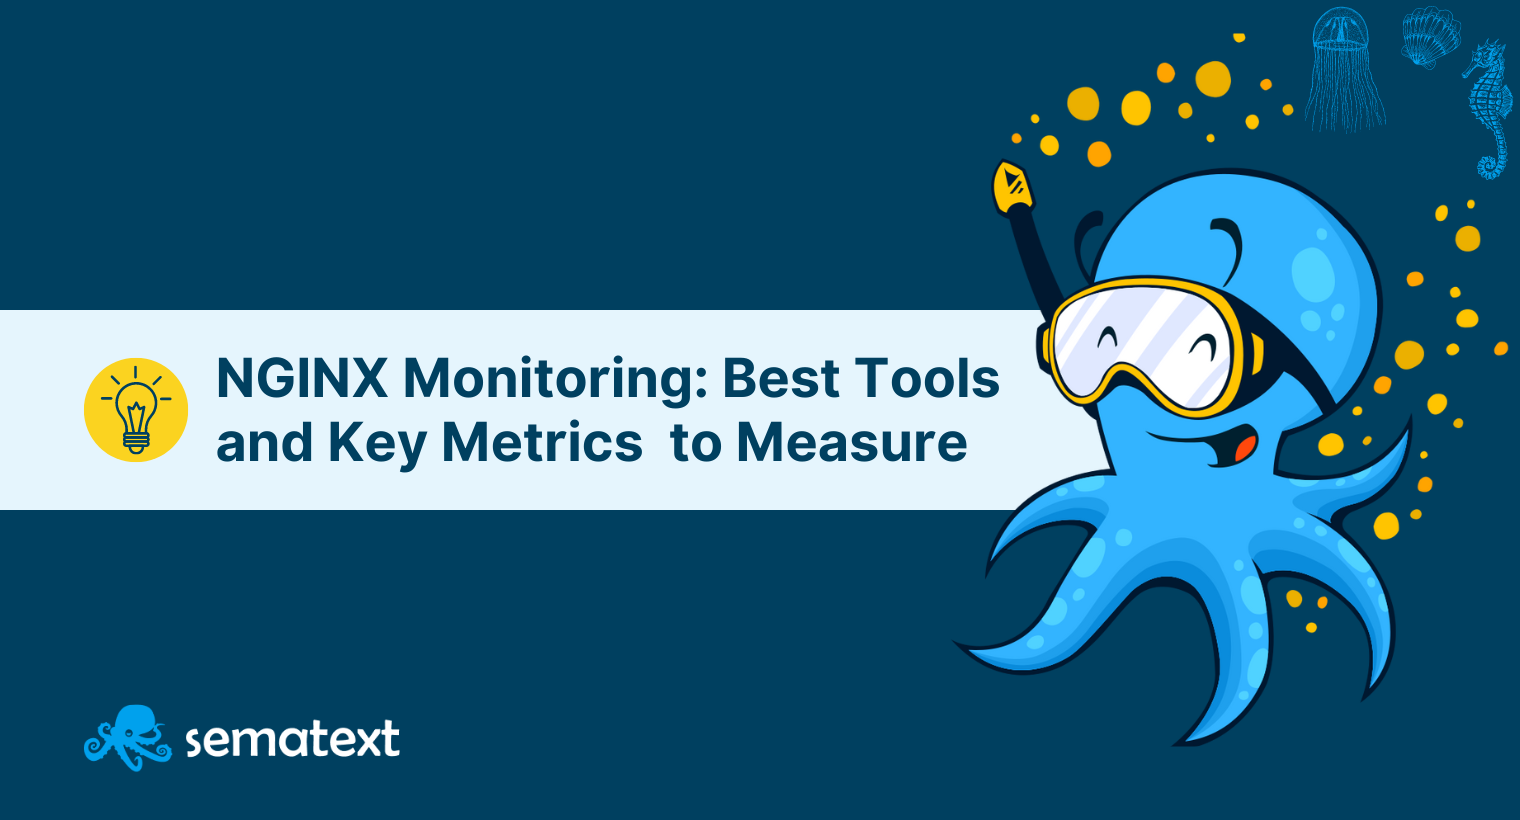 NGINX Monitoring: Best Tools and Key Metrics You Should Know About